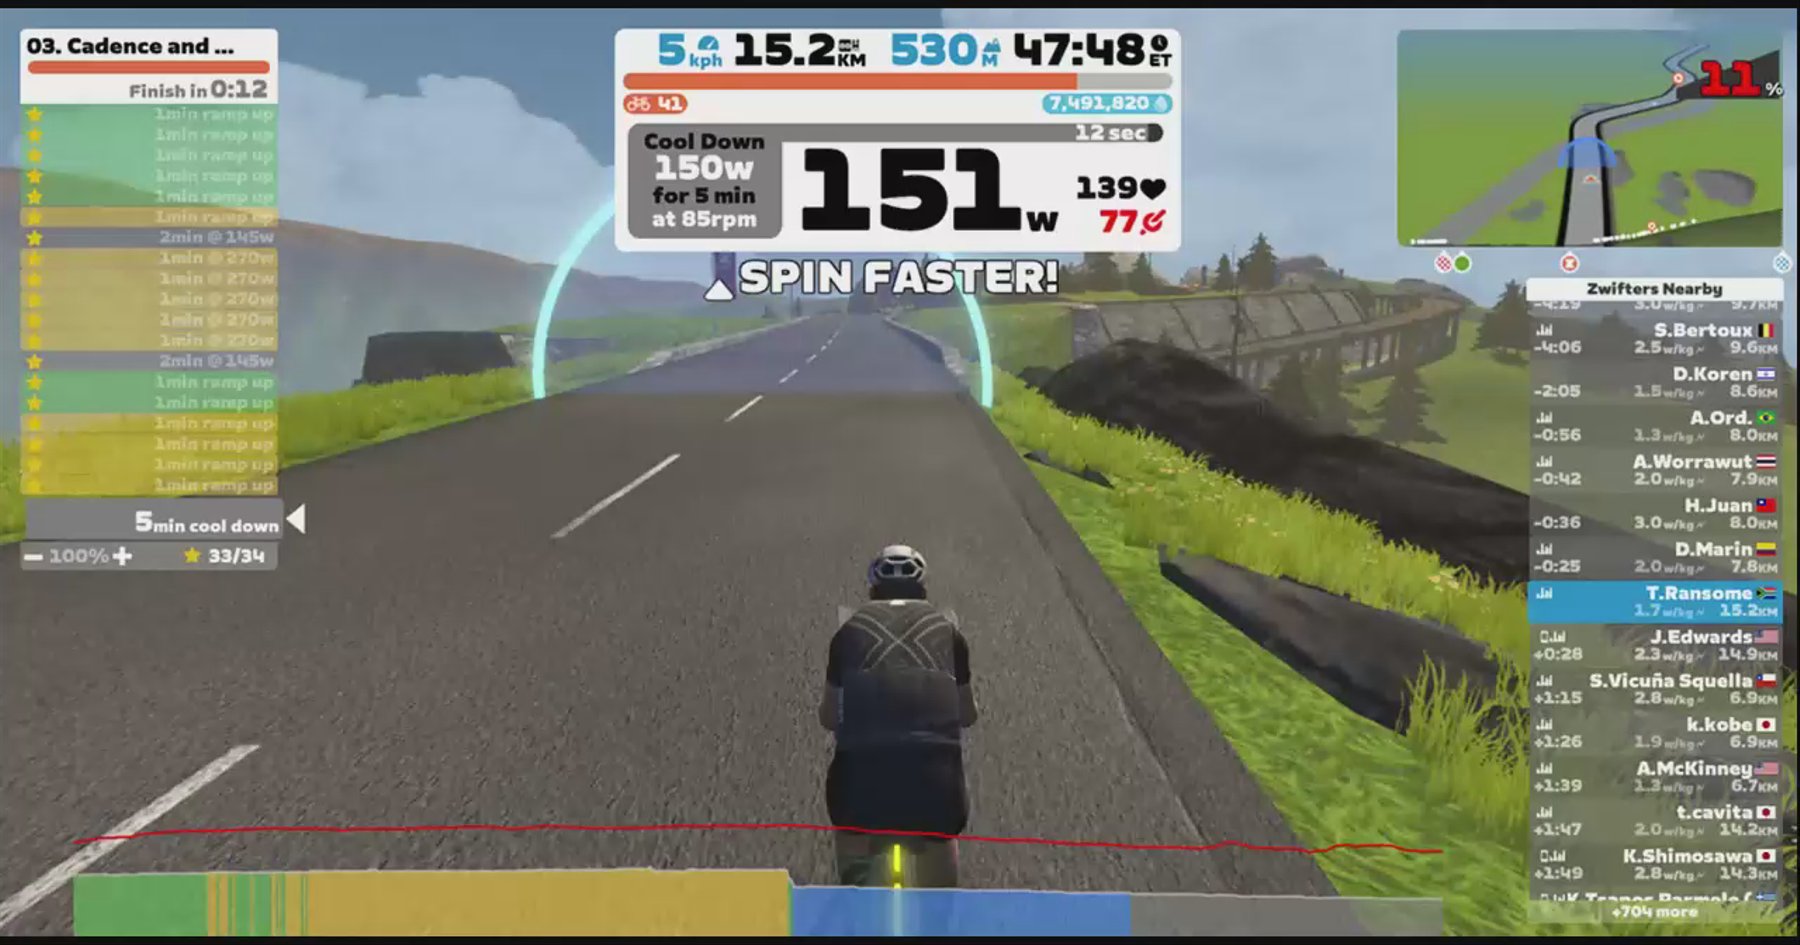 Zwift - 03. Cadence and Cruise in France